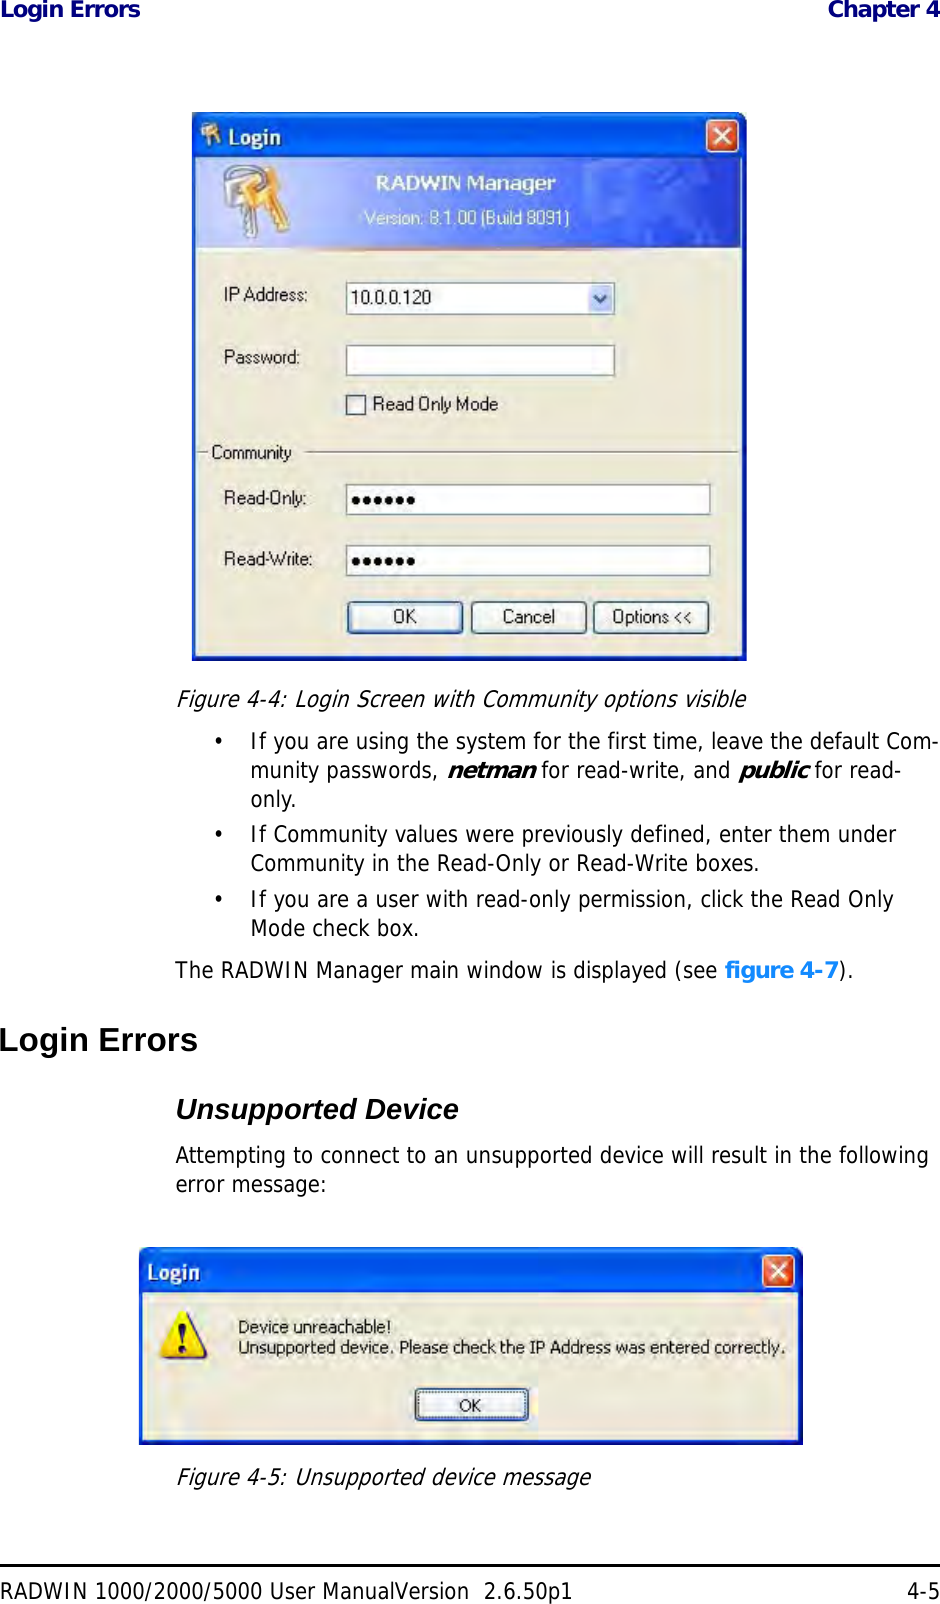 Login Errors  Chapter 4RADWIN 1000/2000/5000 User ManualVersion  2.6.50p1 4-5Figure 4-4: Login Screen with Community options visible• If you are using the system for the first time, leave the default Com-munity passwords, netman for read-write, and public for read-only.• If Community values were previously defined, enter them under Community in the Read-Only or Read-Write boxes.• If you are a user with read-only permission, click the Read Only Mode check box.The RADWIN Manager main window is displayed (see figure 4-7).Login ErrorsUnsupported DeviceAttempting to connect to an unsupported device will result in the following error message:Figure 4-5: Unsupported device message